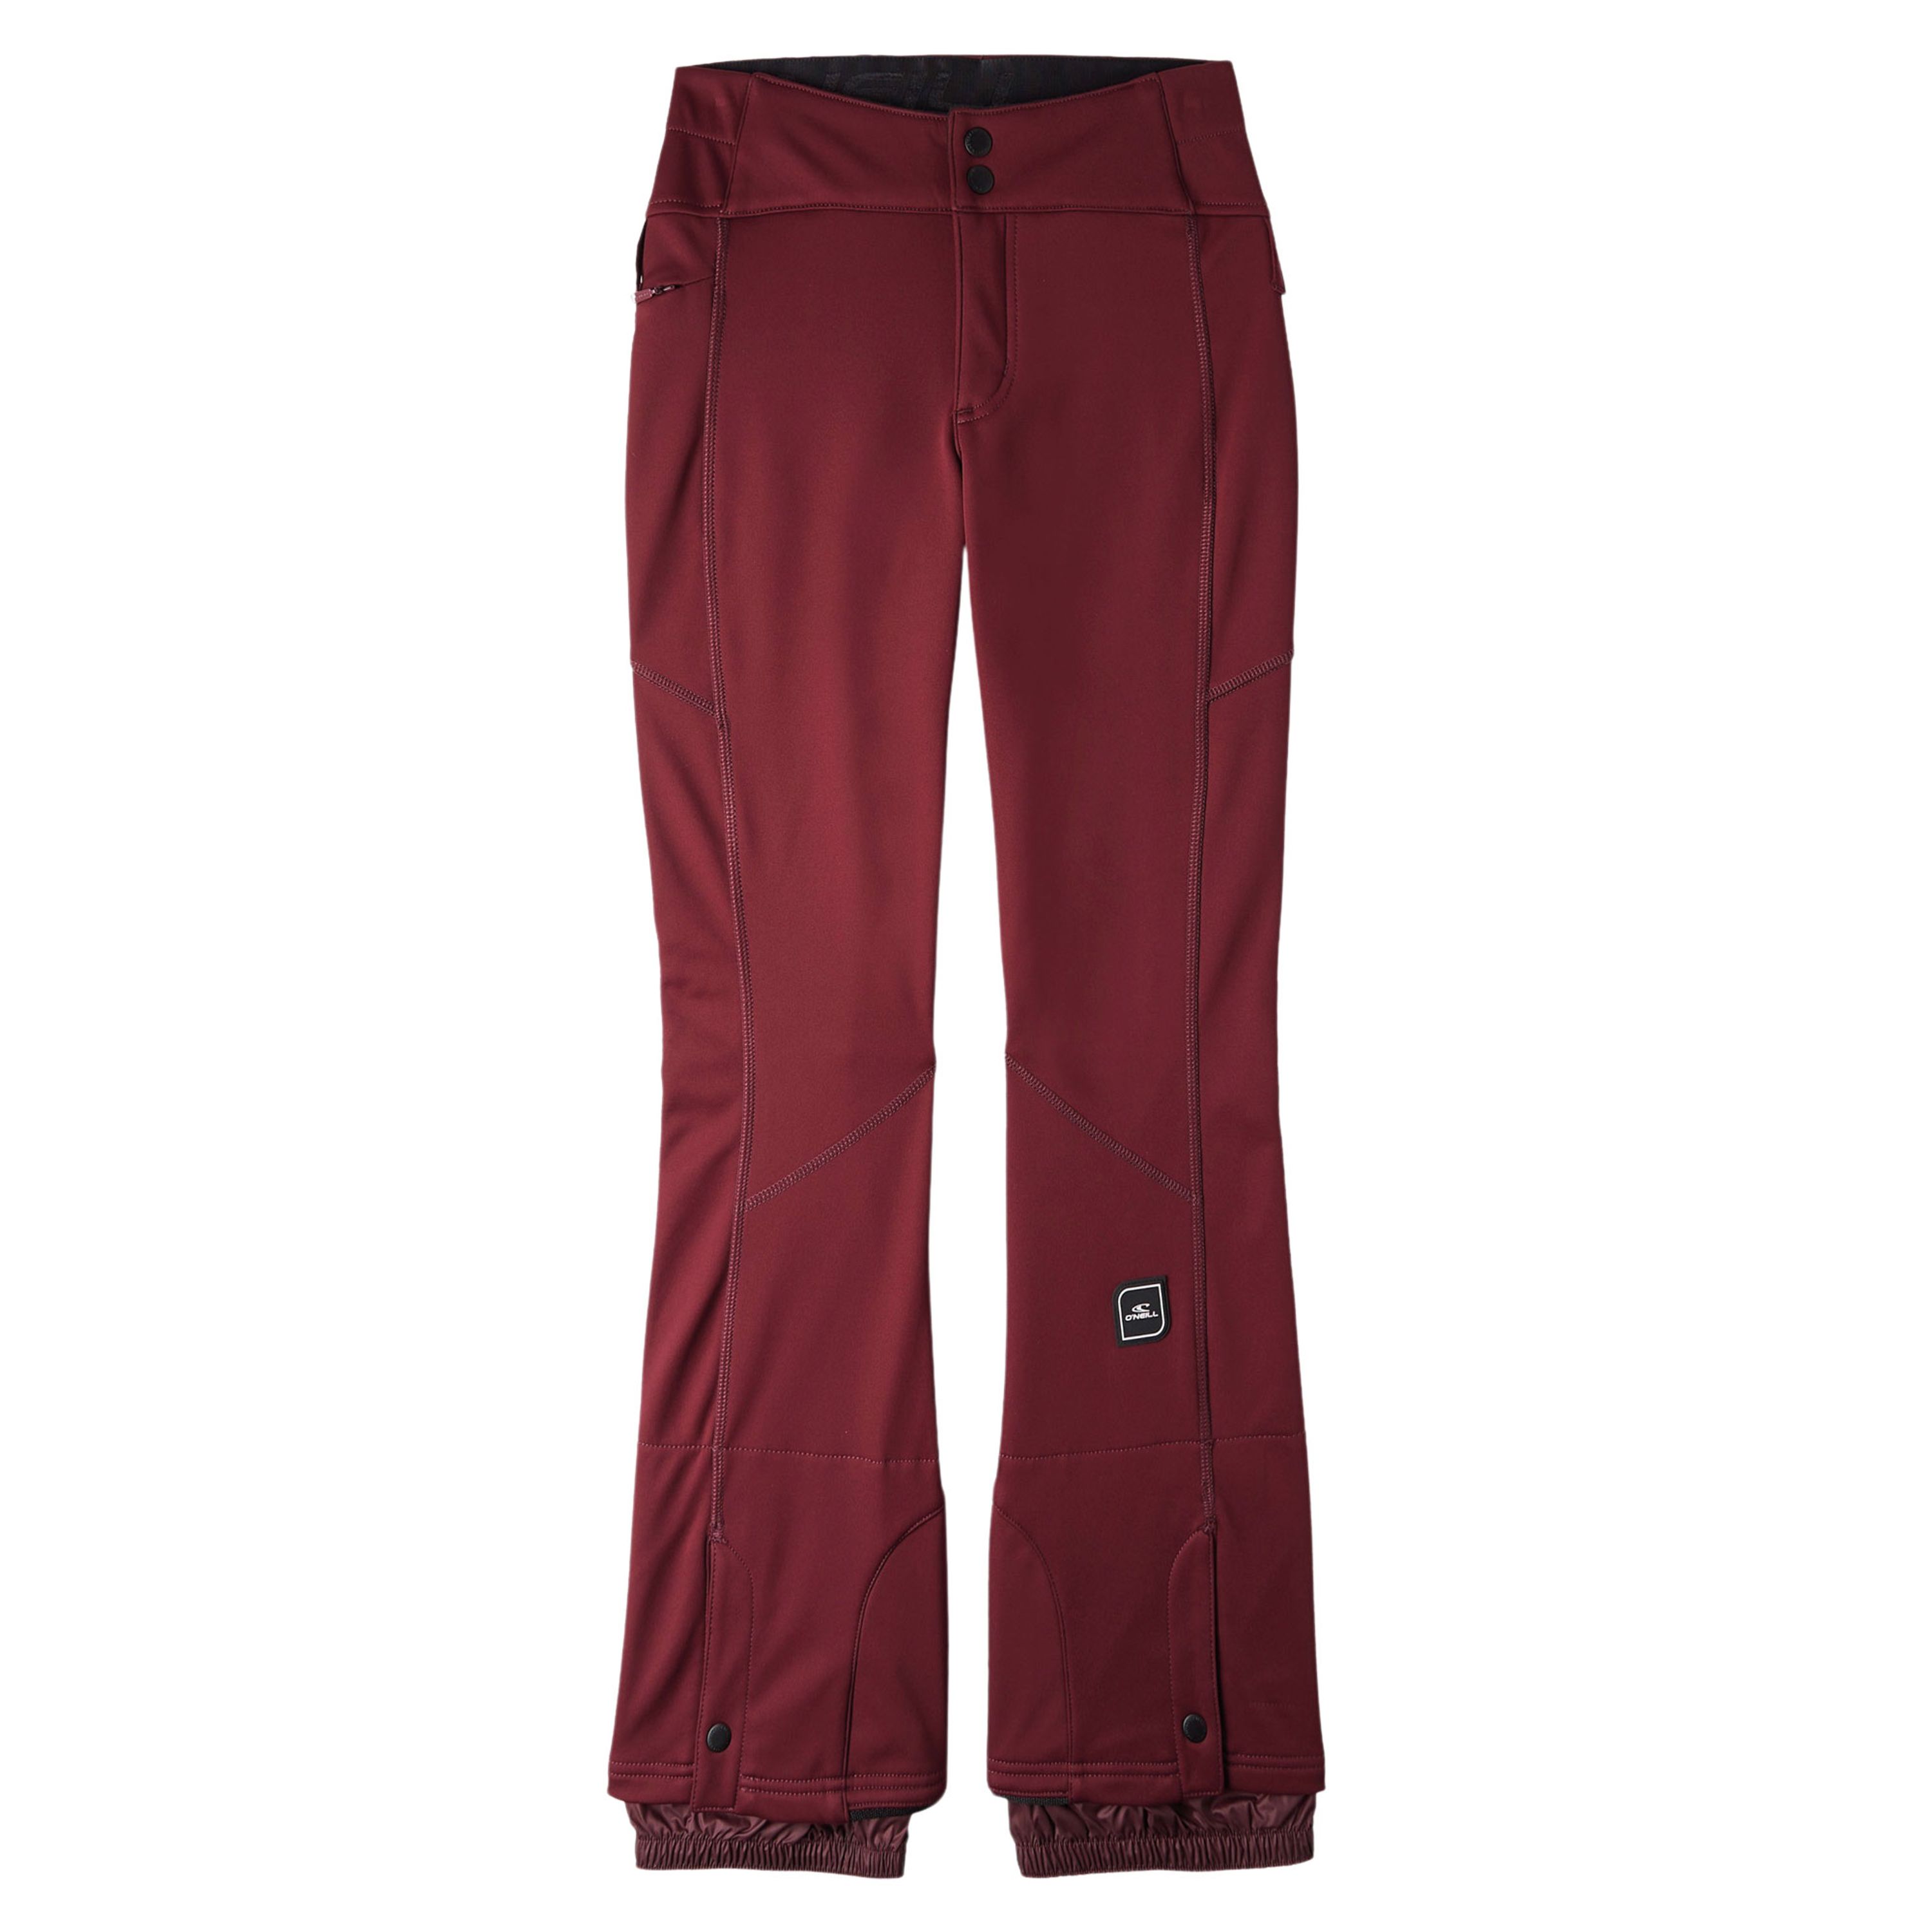 O'Neill skibroek Blessed bordeaux Rood Polyester Effen 176